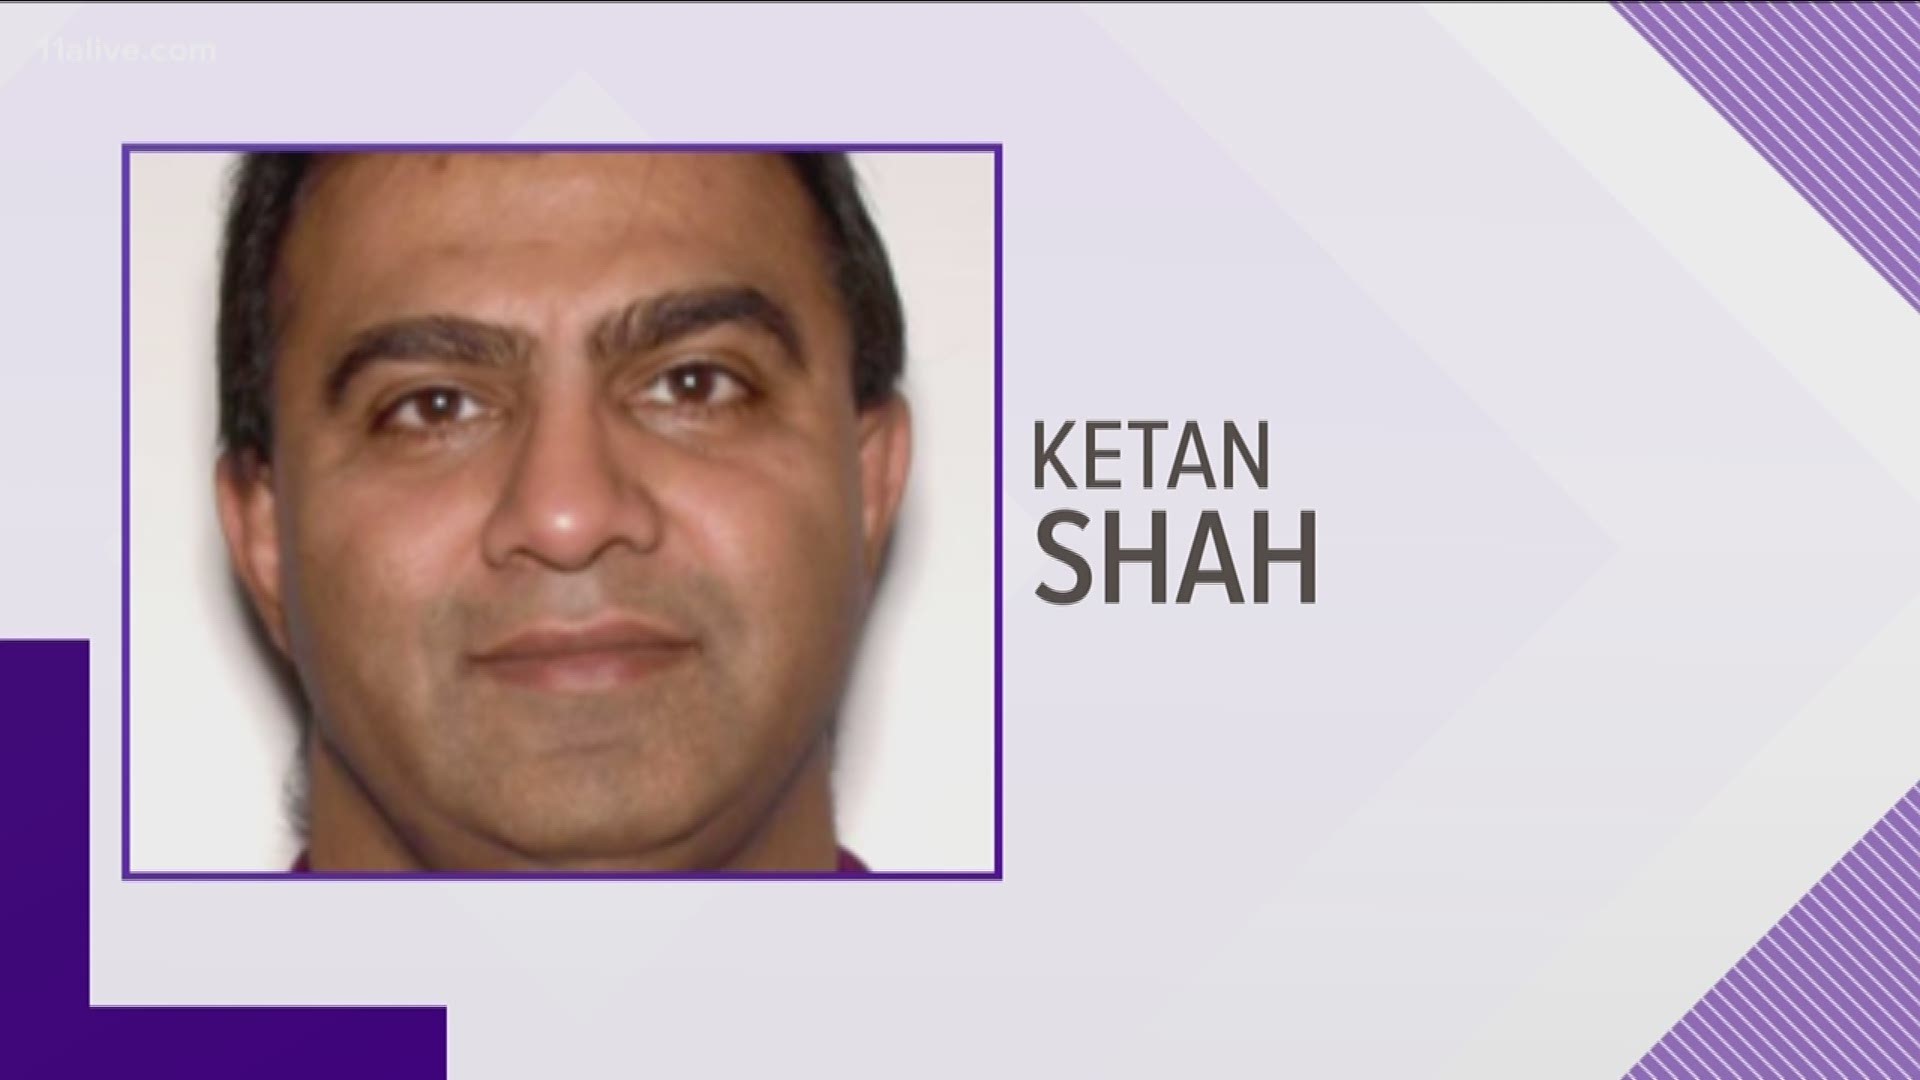 Ketan Shah, 48, is accused of offering to sell tickets to at least six people. Gwinnett County Police re-interviewed the victims and gathered enough information to obtain a felony warrant for his arrest.